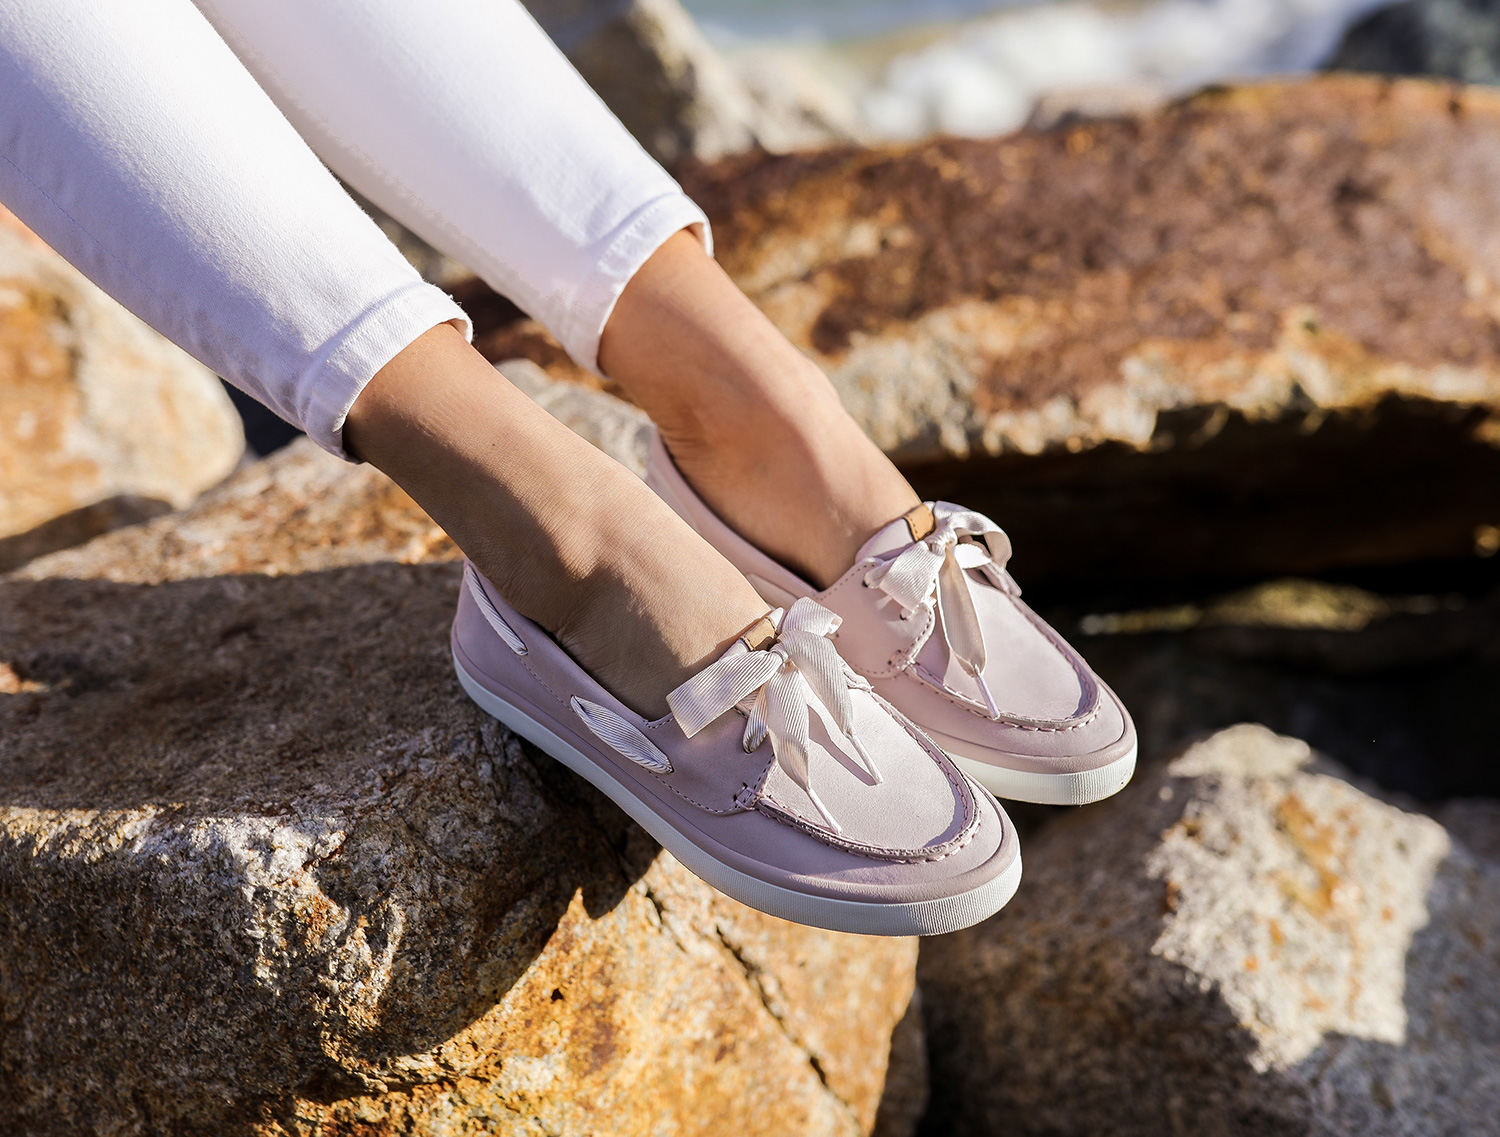 Adelina Perrin of The Charming Olive Wearing the new Sperry Sailor Boat Shoes